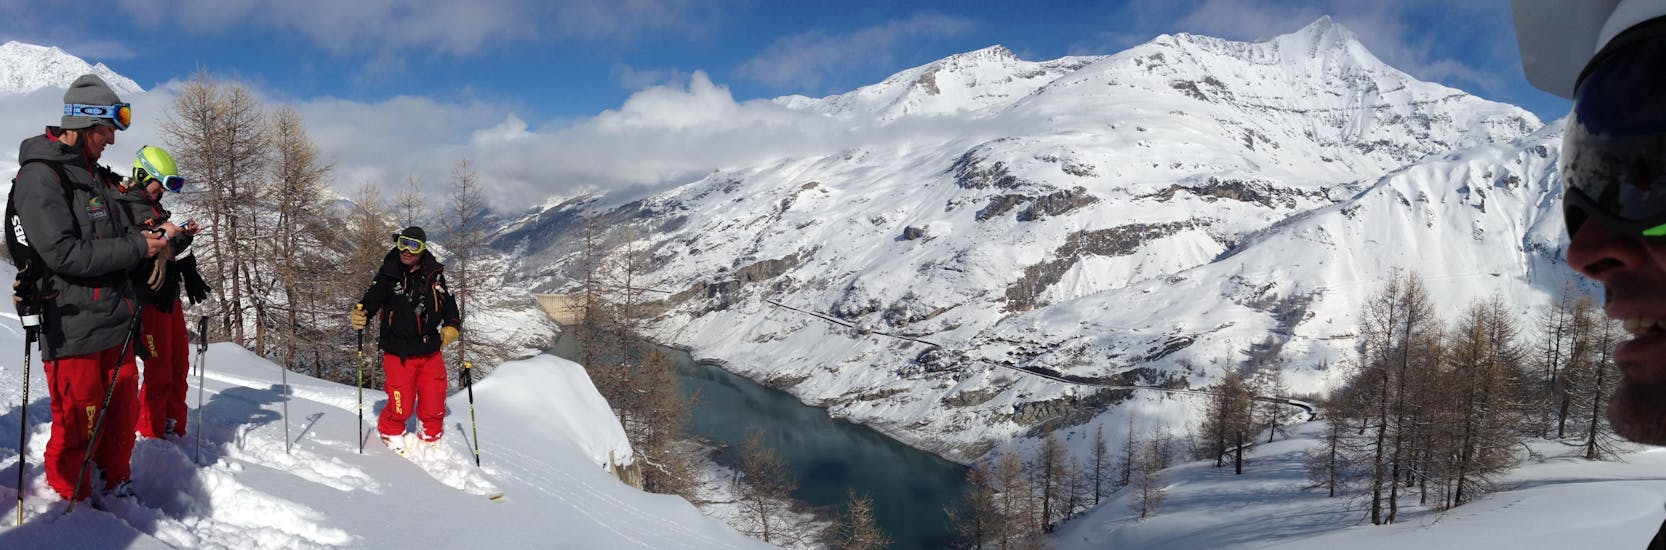 Skiers are overlooking the Tignes Lake during their Off-Piste Skiing Lessons with the ski school Evolution 2 Tignes.